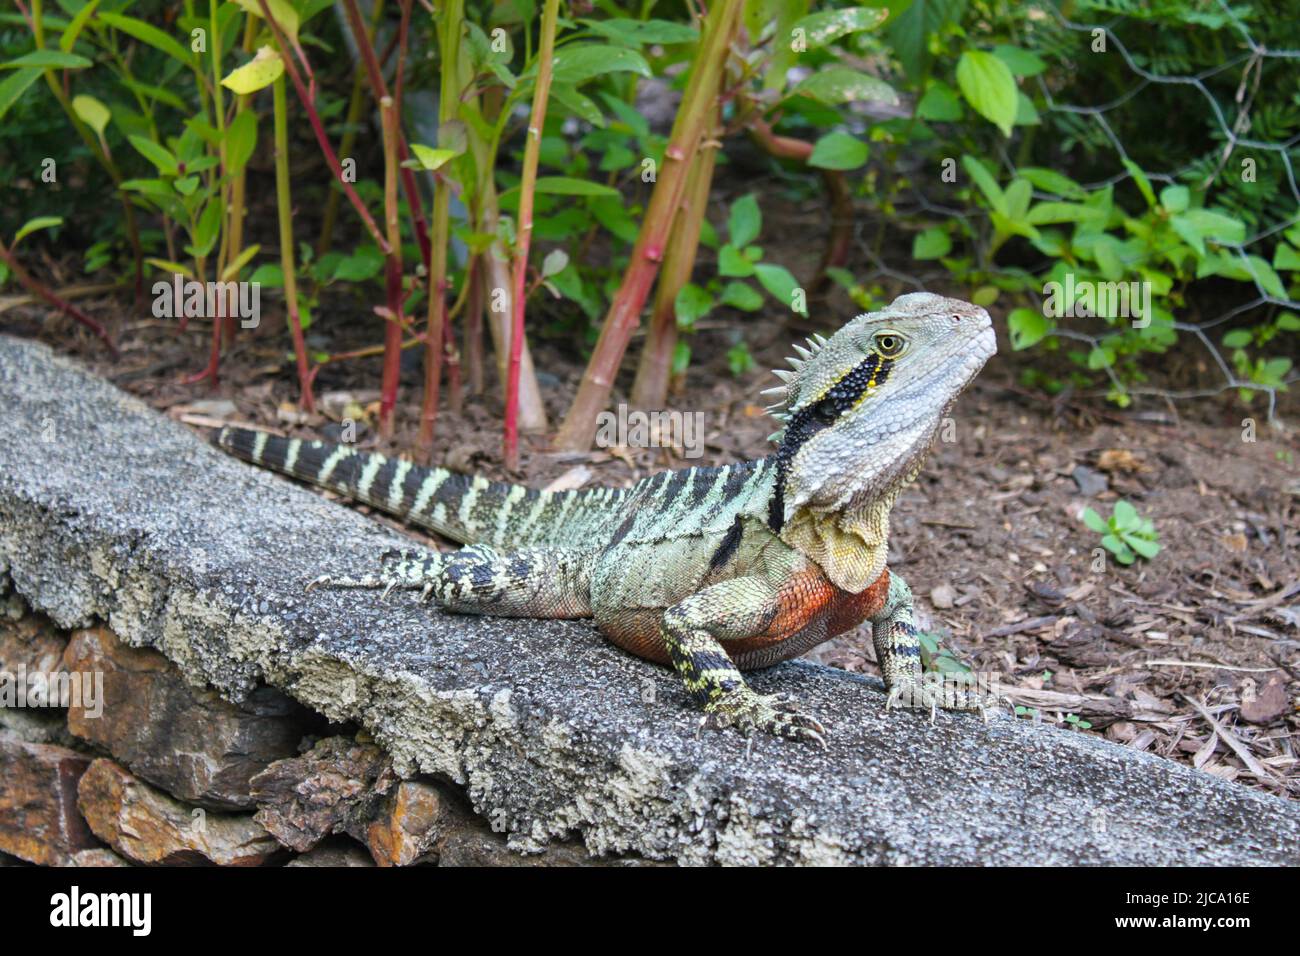 Closeup of colorful iguana on rock wall with tropical plants in background Stock Photo